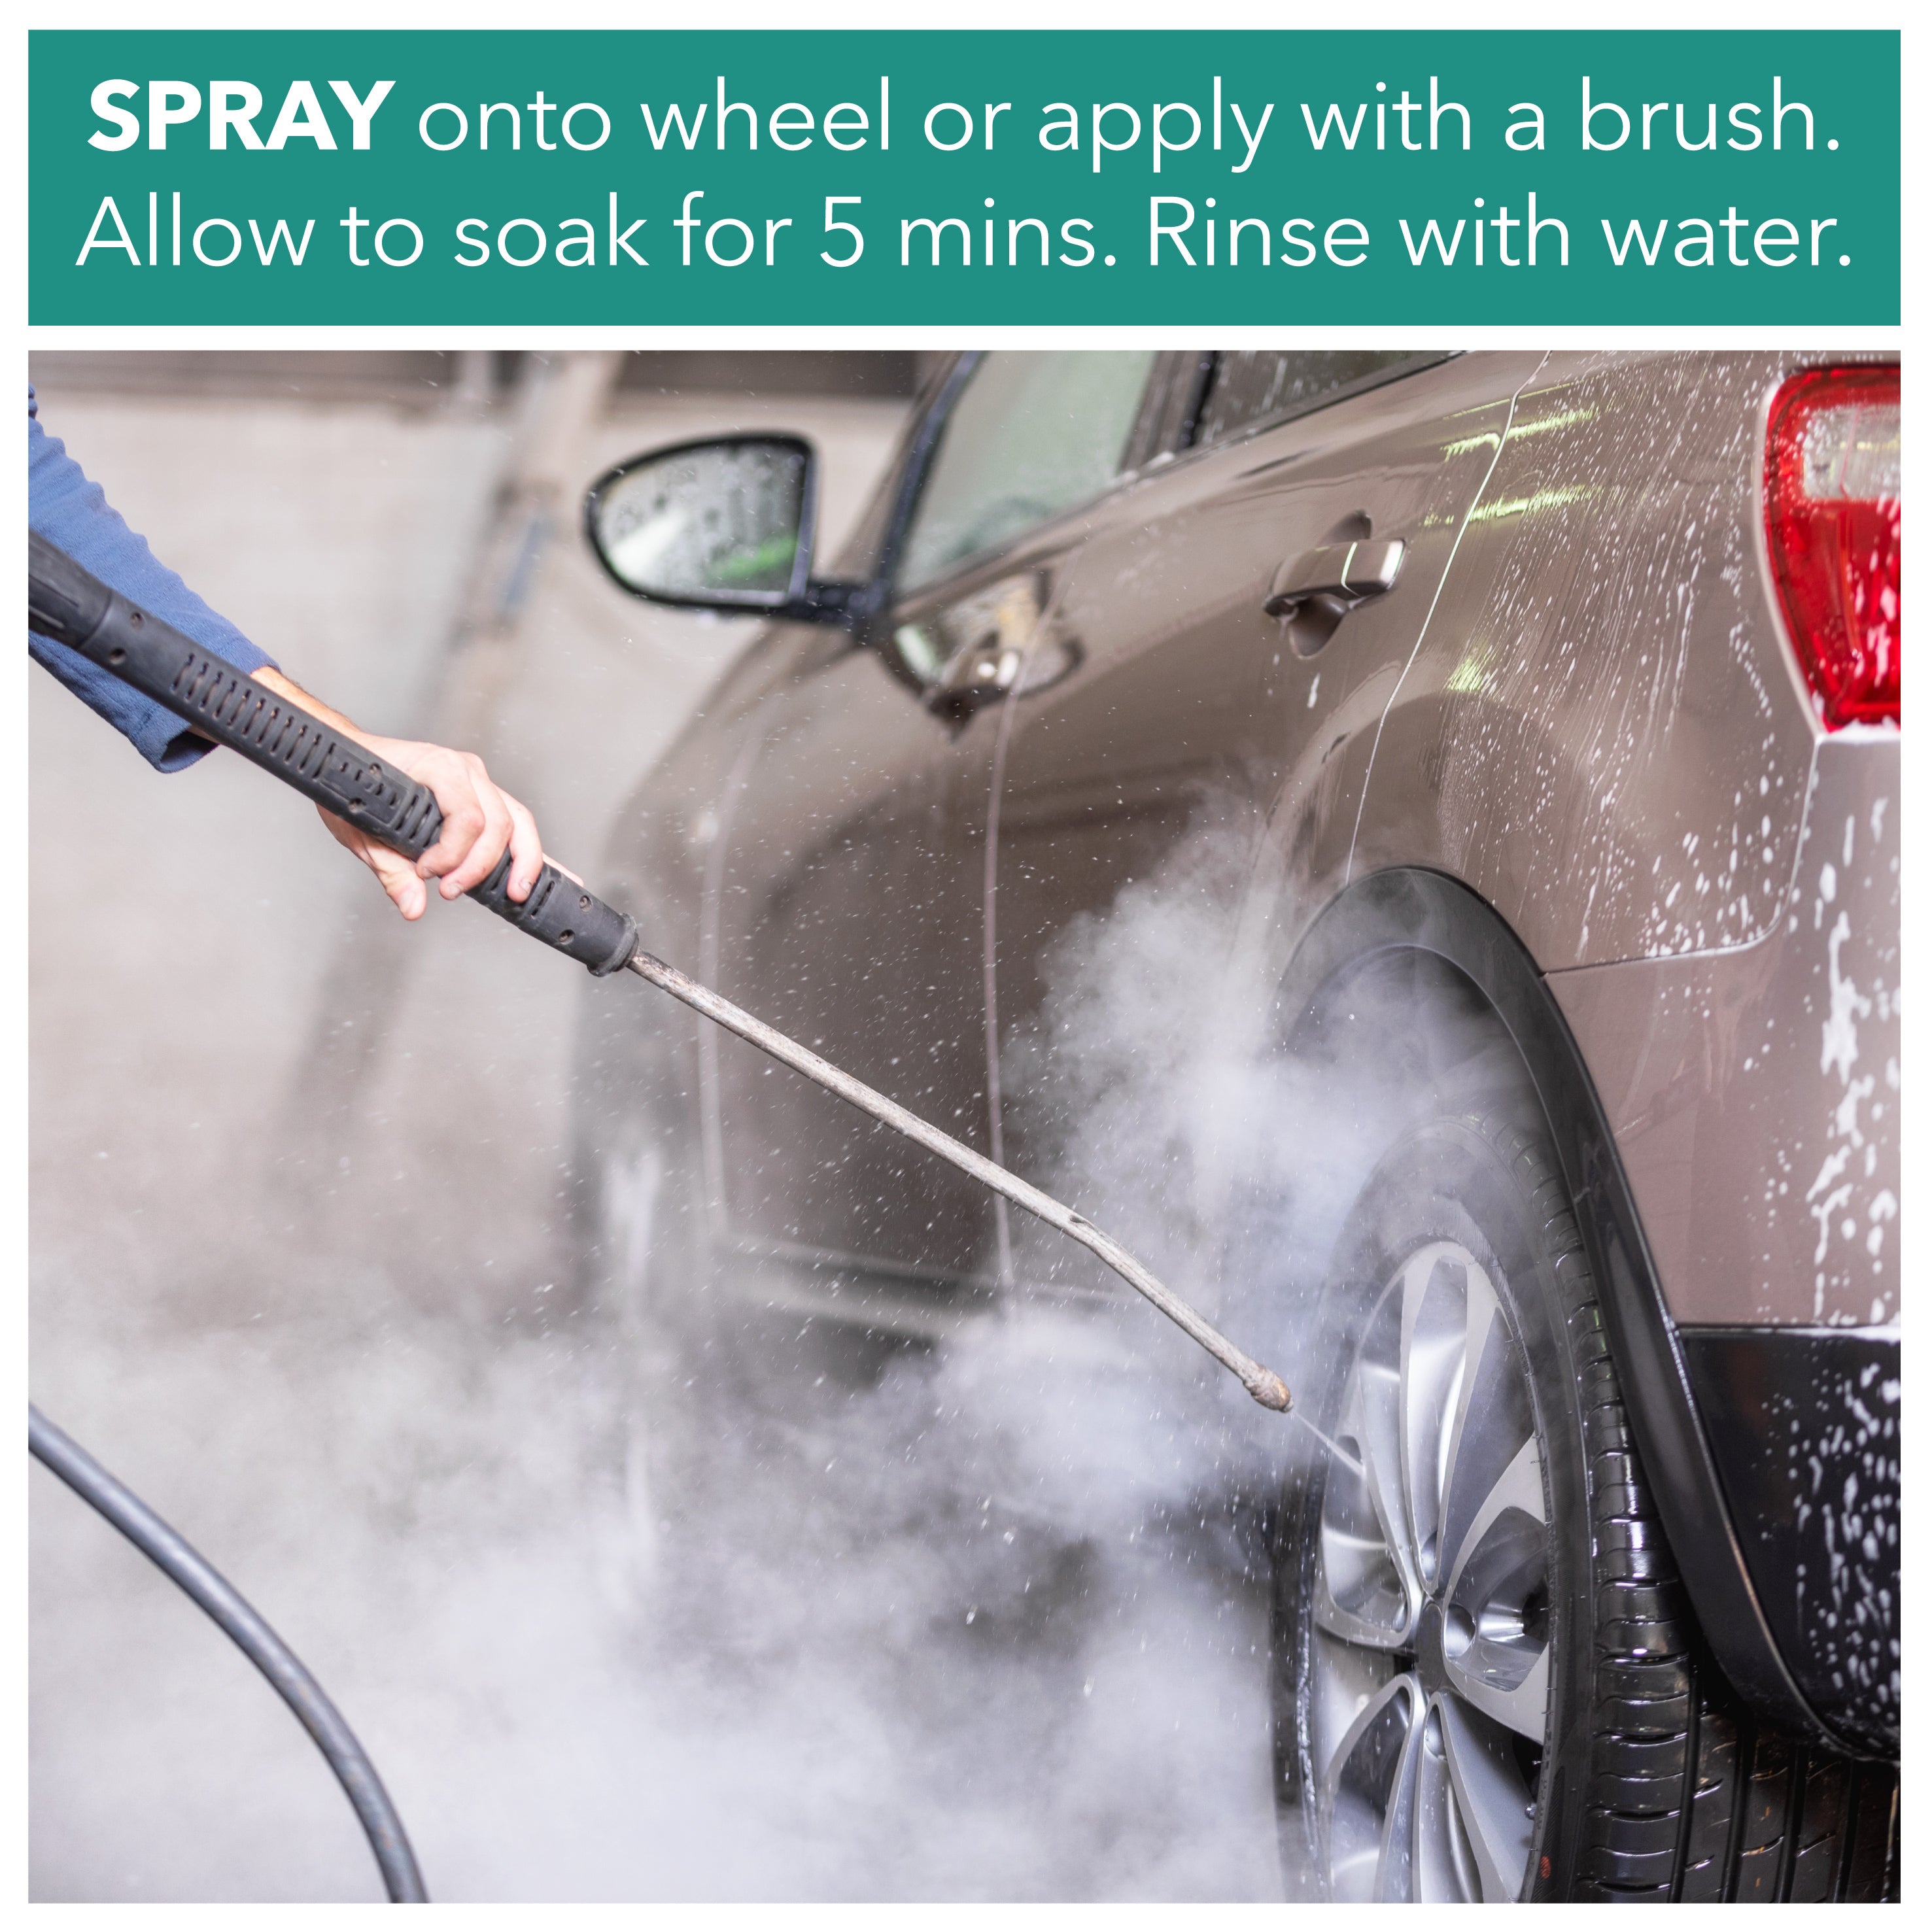 spray onto wheel or apply with a brush, allow to soak fo 5 mins, rinse with water